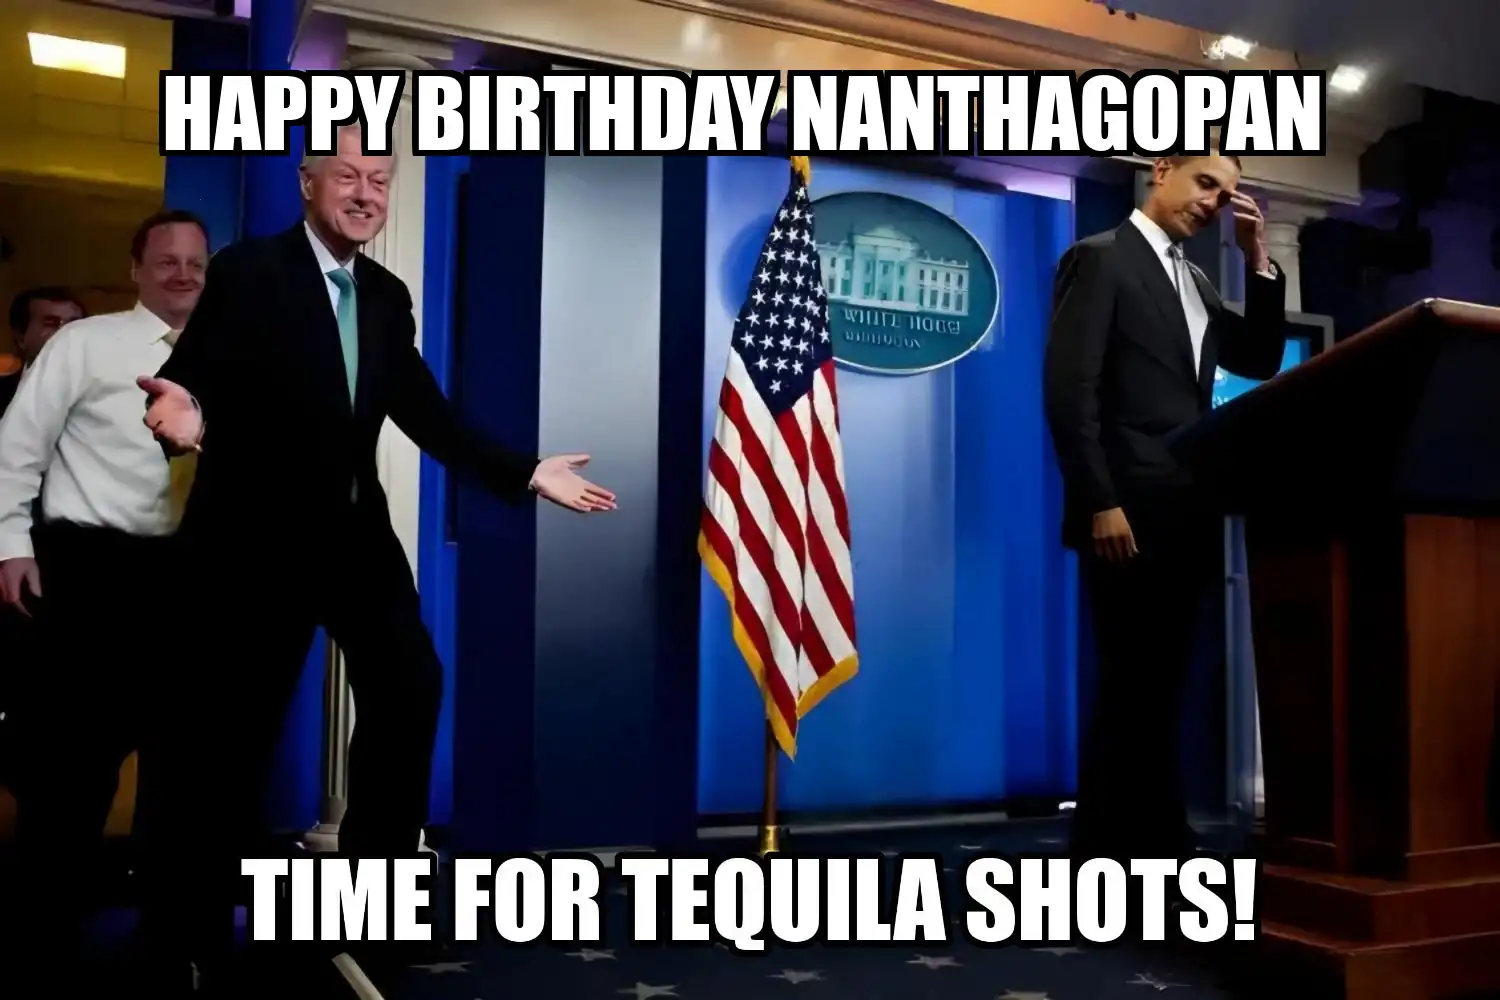 Happy Birthday Nanthagopan Time For Tequila Shots Memes